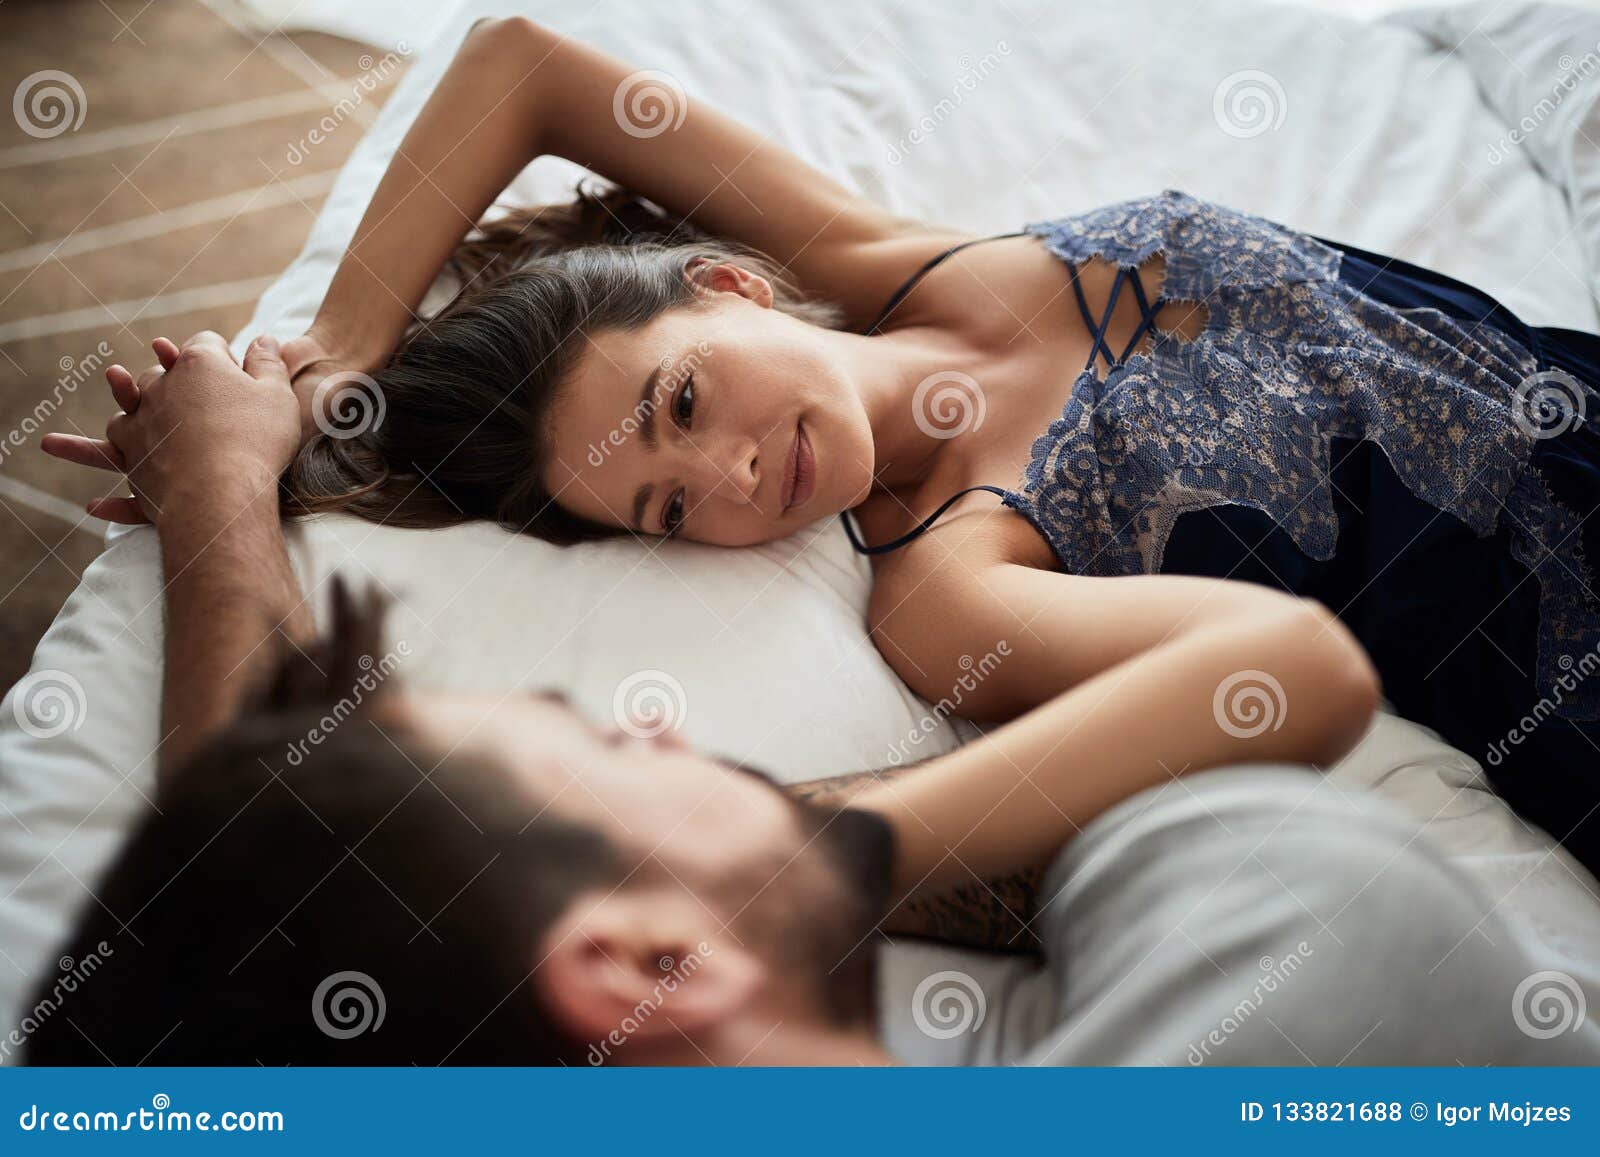 intimate woman and man during foreplay in bed